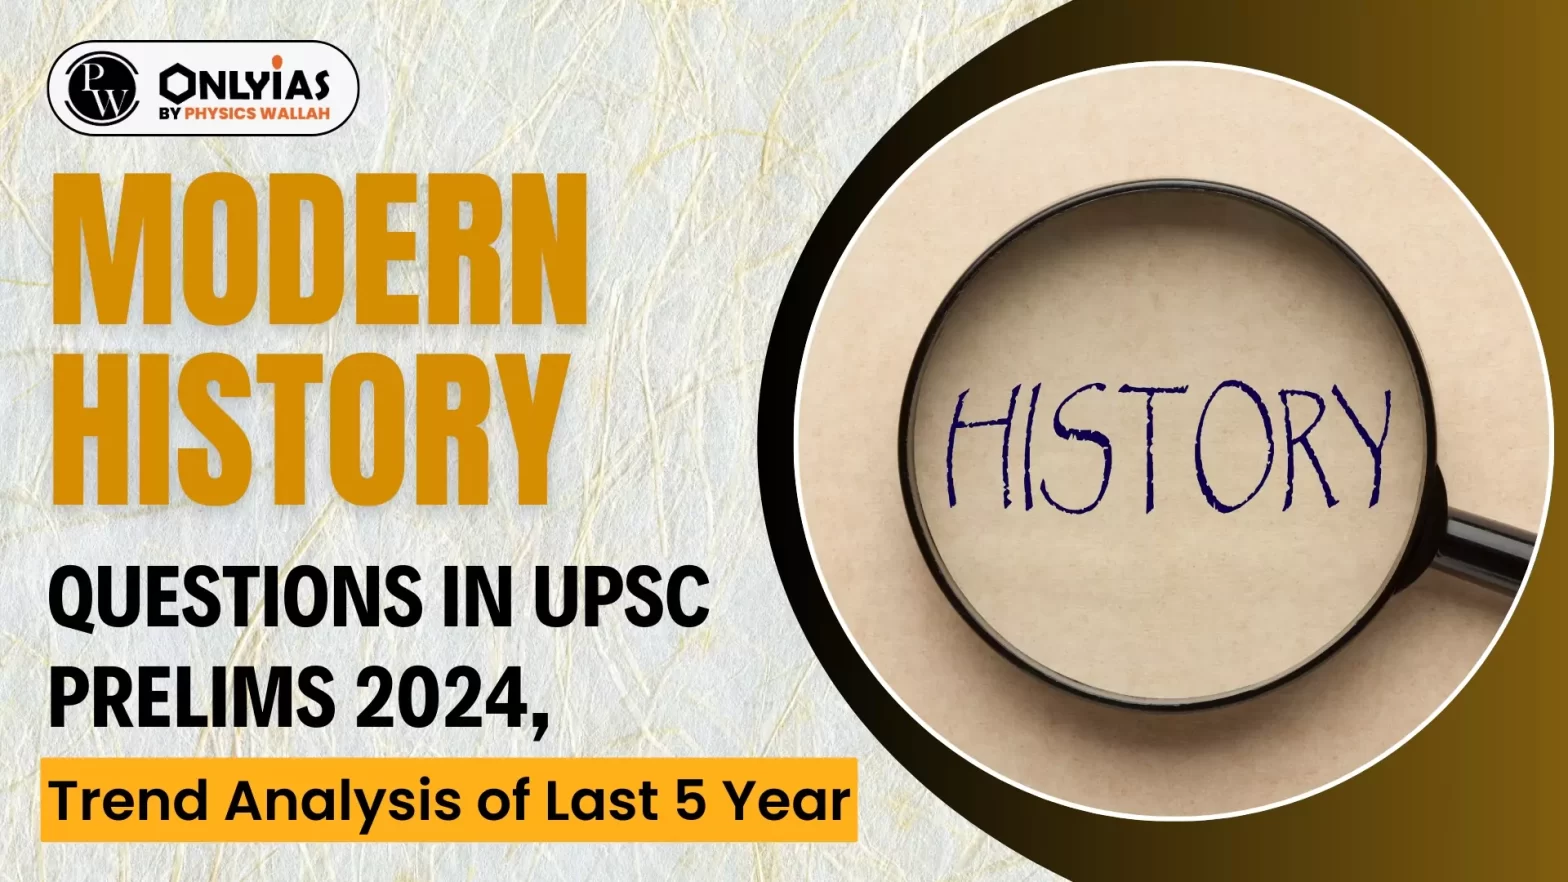 Modern History Questions in UPSC Prelims 2024, Trend Analysis of Last 5 Year